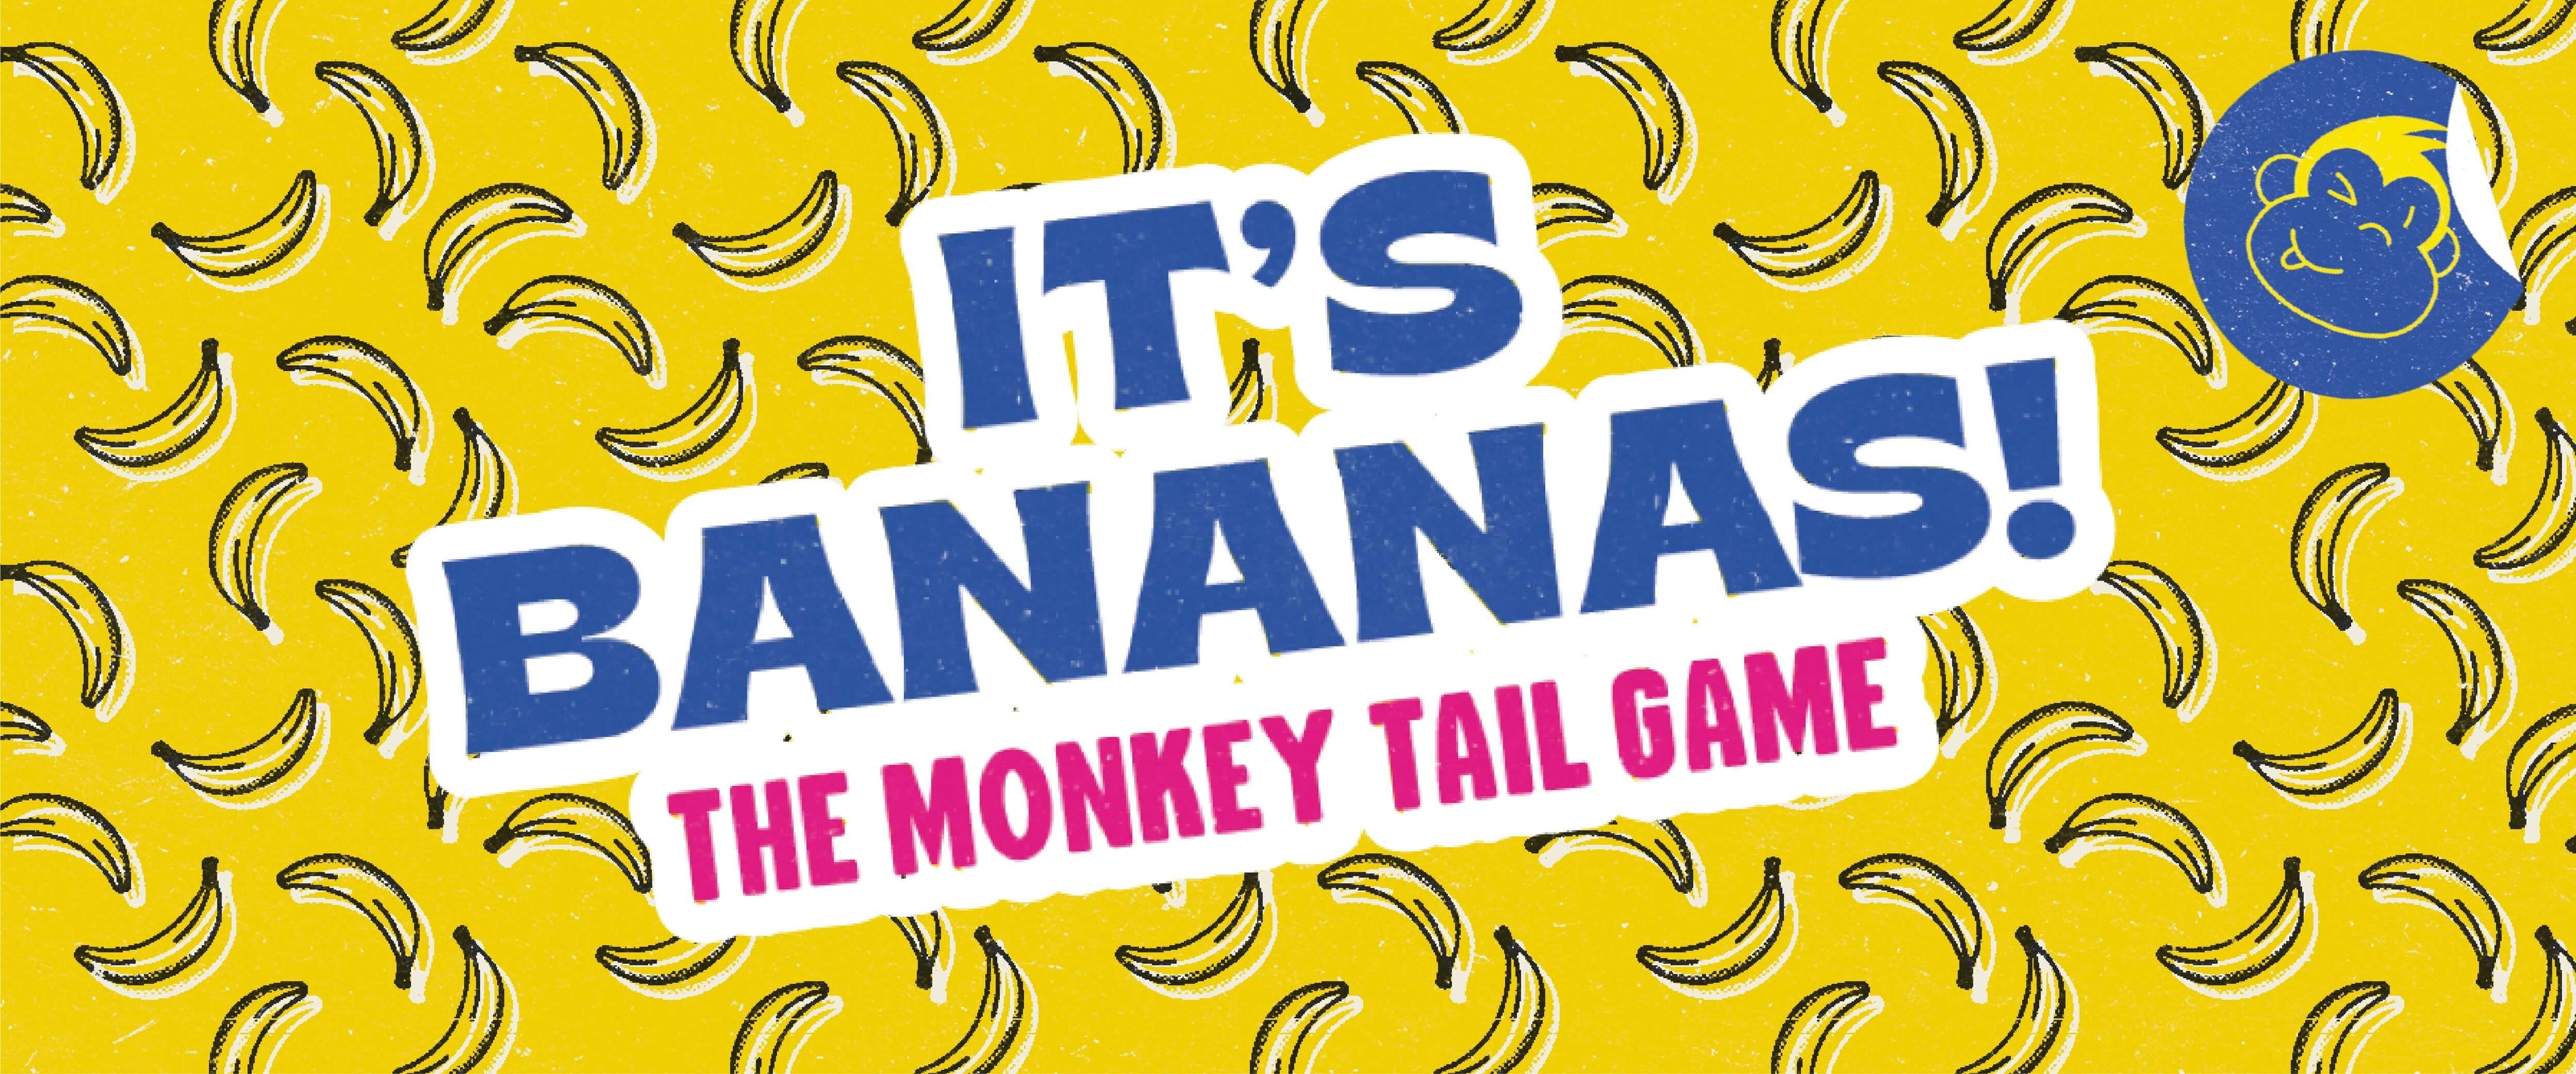 It's Bananas! The Monkey Tail Game - Funny Family Party Game for Adults,  Kids, & Teens - Ages 6+, 2+ Players, Top 10 Best Board Games 2023 for  Party